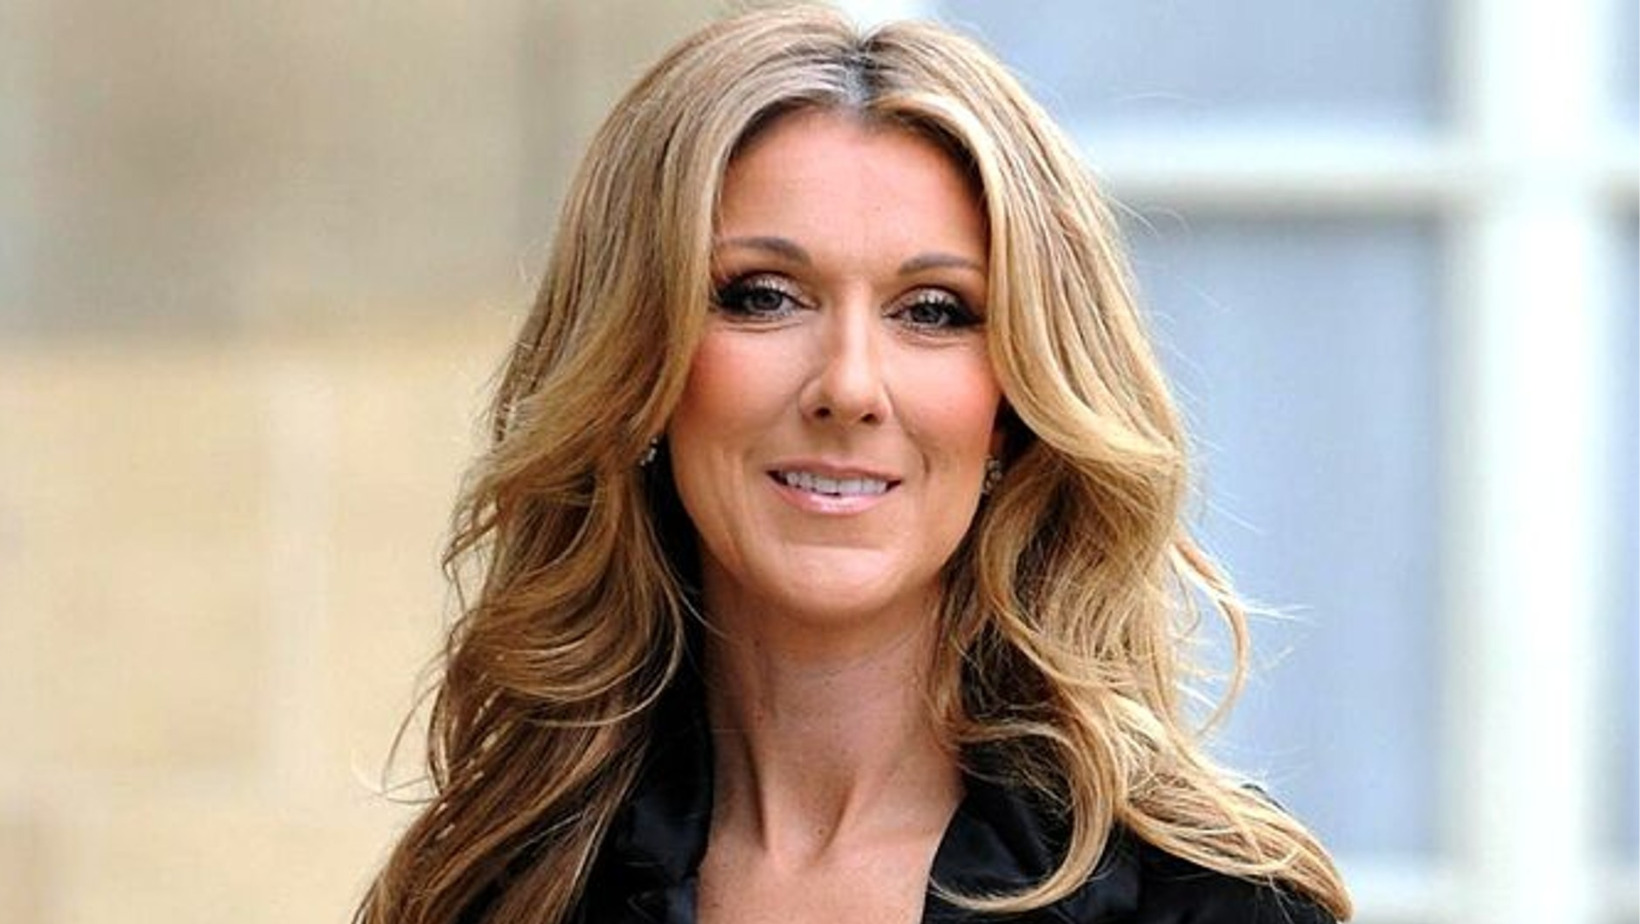 Celine Dion’s sister discusses the singer’s health